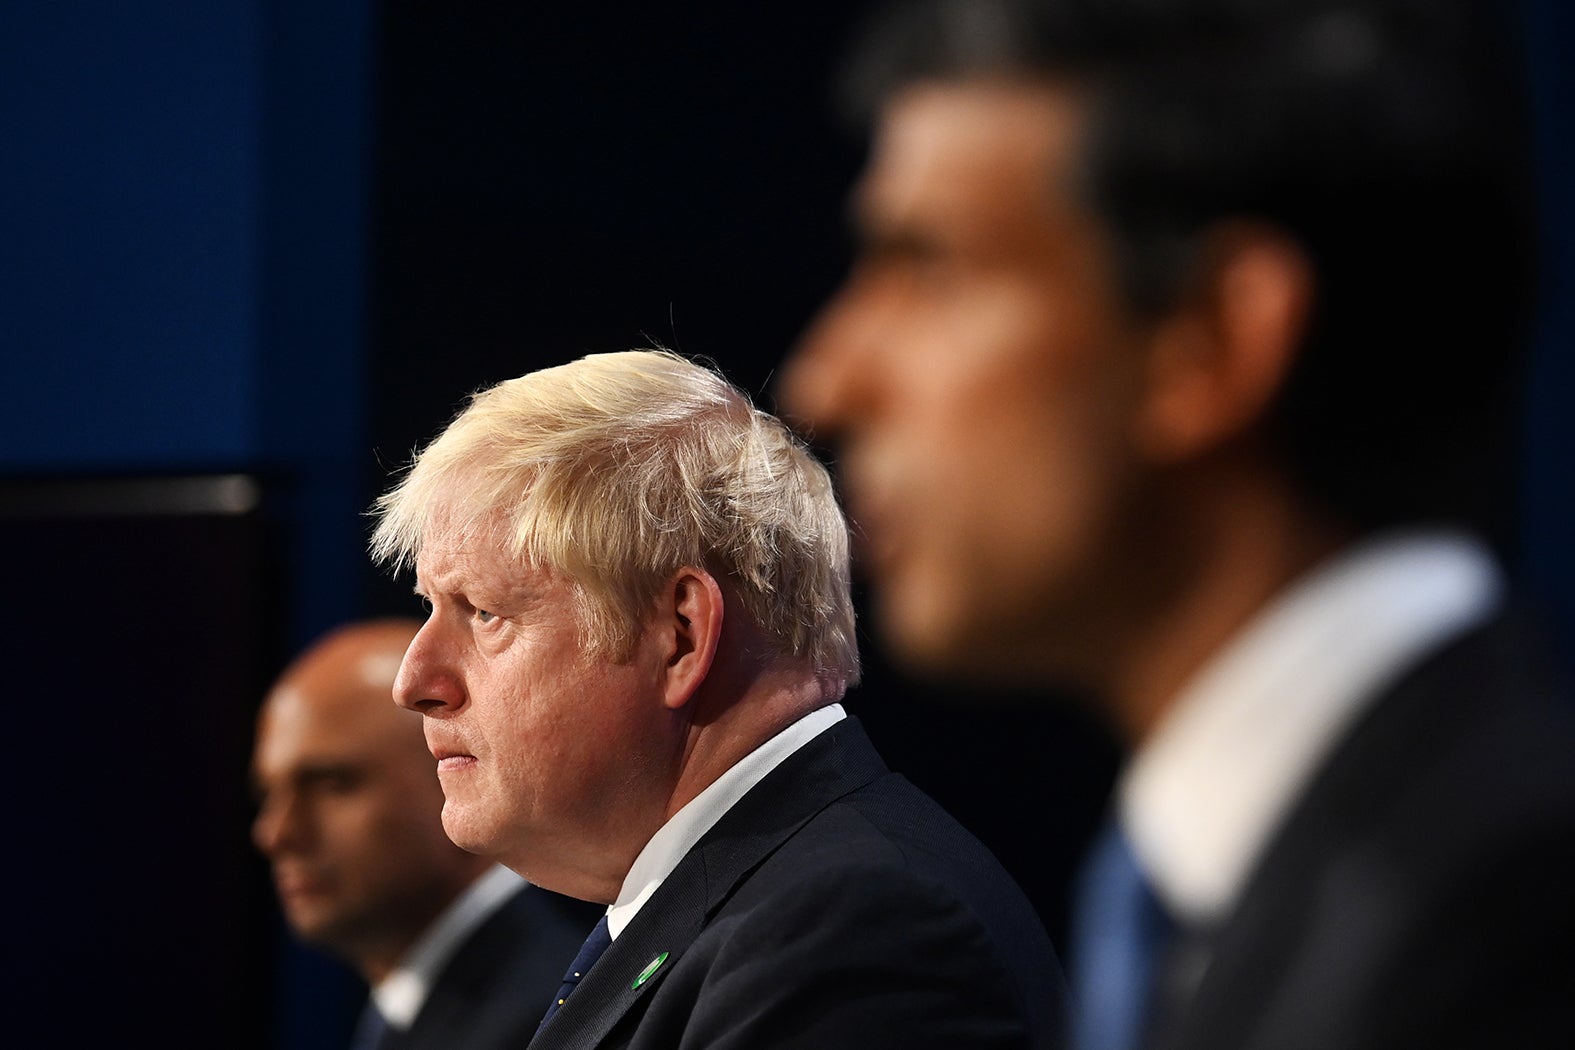 Who could replace Boris Johnson as Prime Minister?